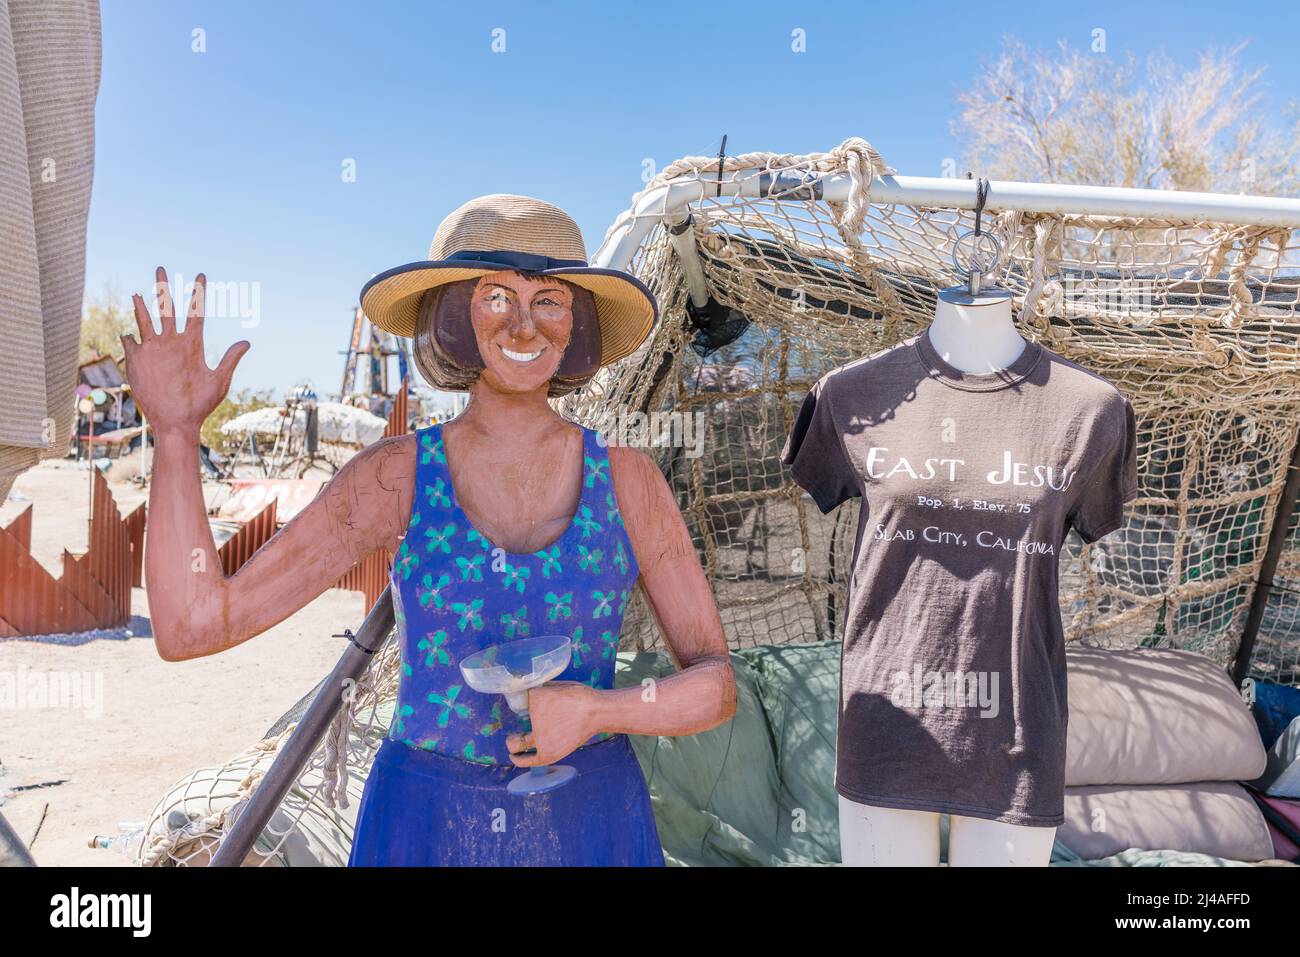 A waving cutout female figure in East Jesus, California. East Jesus is an off-the-grid art community in the Sonoran Desert of Southern California. The Stock Photo